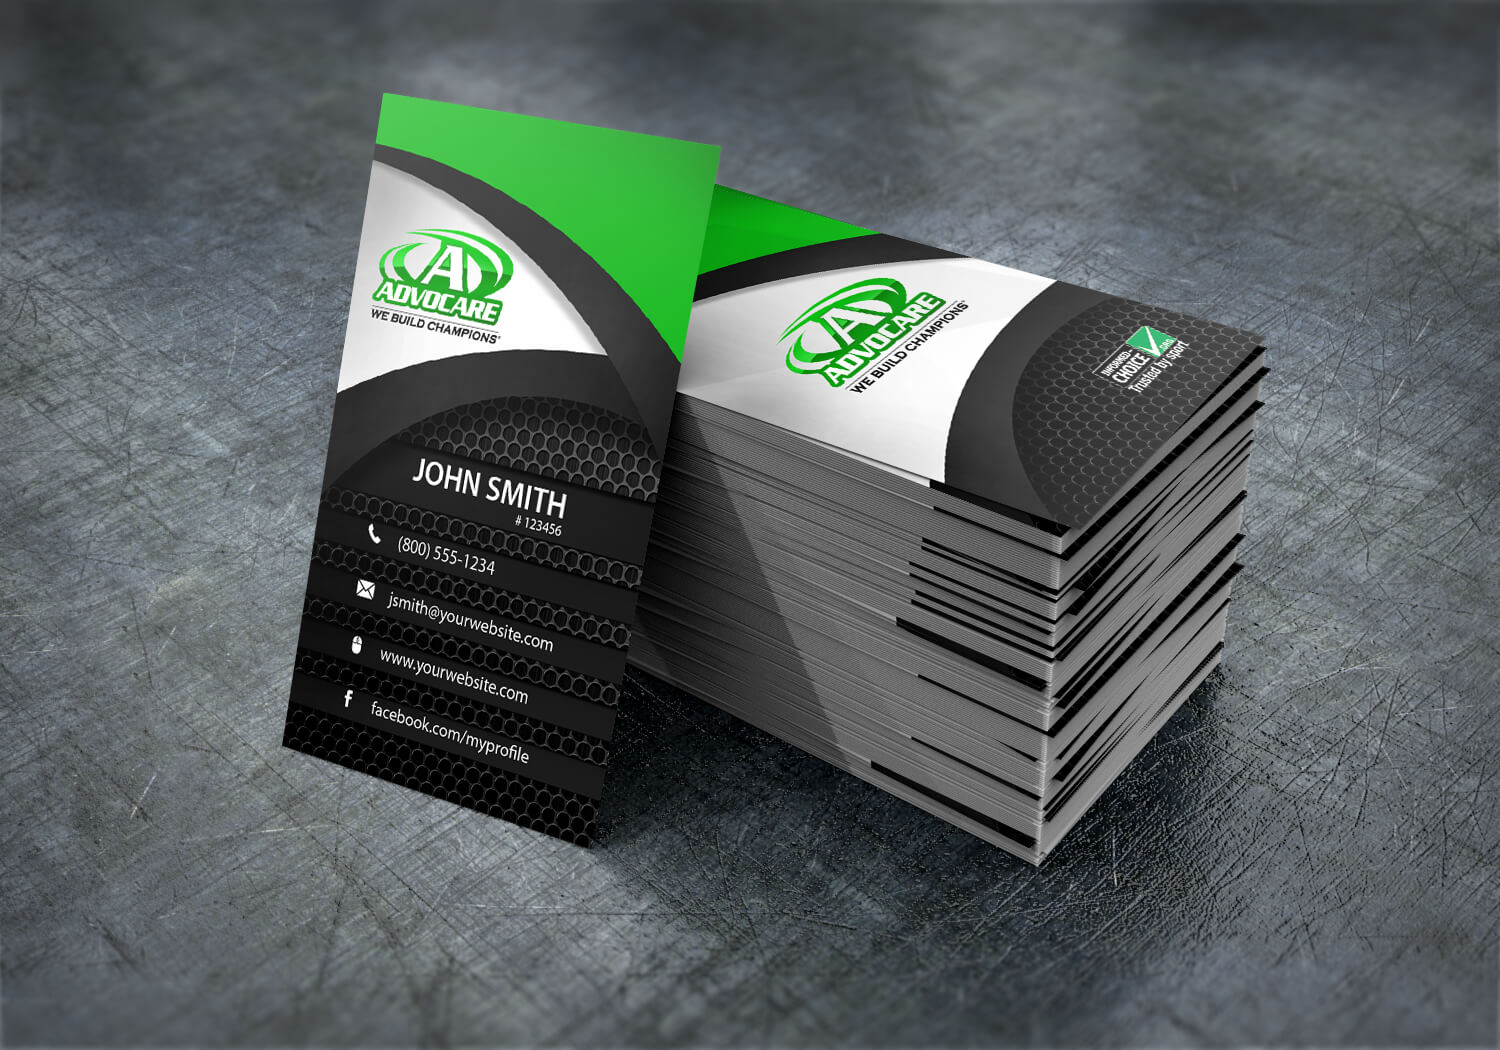 New Cards Are Here For Advocare Distributors! #mlm #advocare Inside Advocare Business Card Template